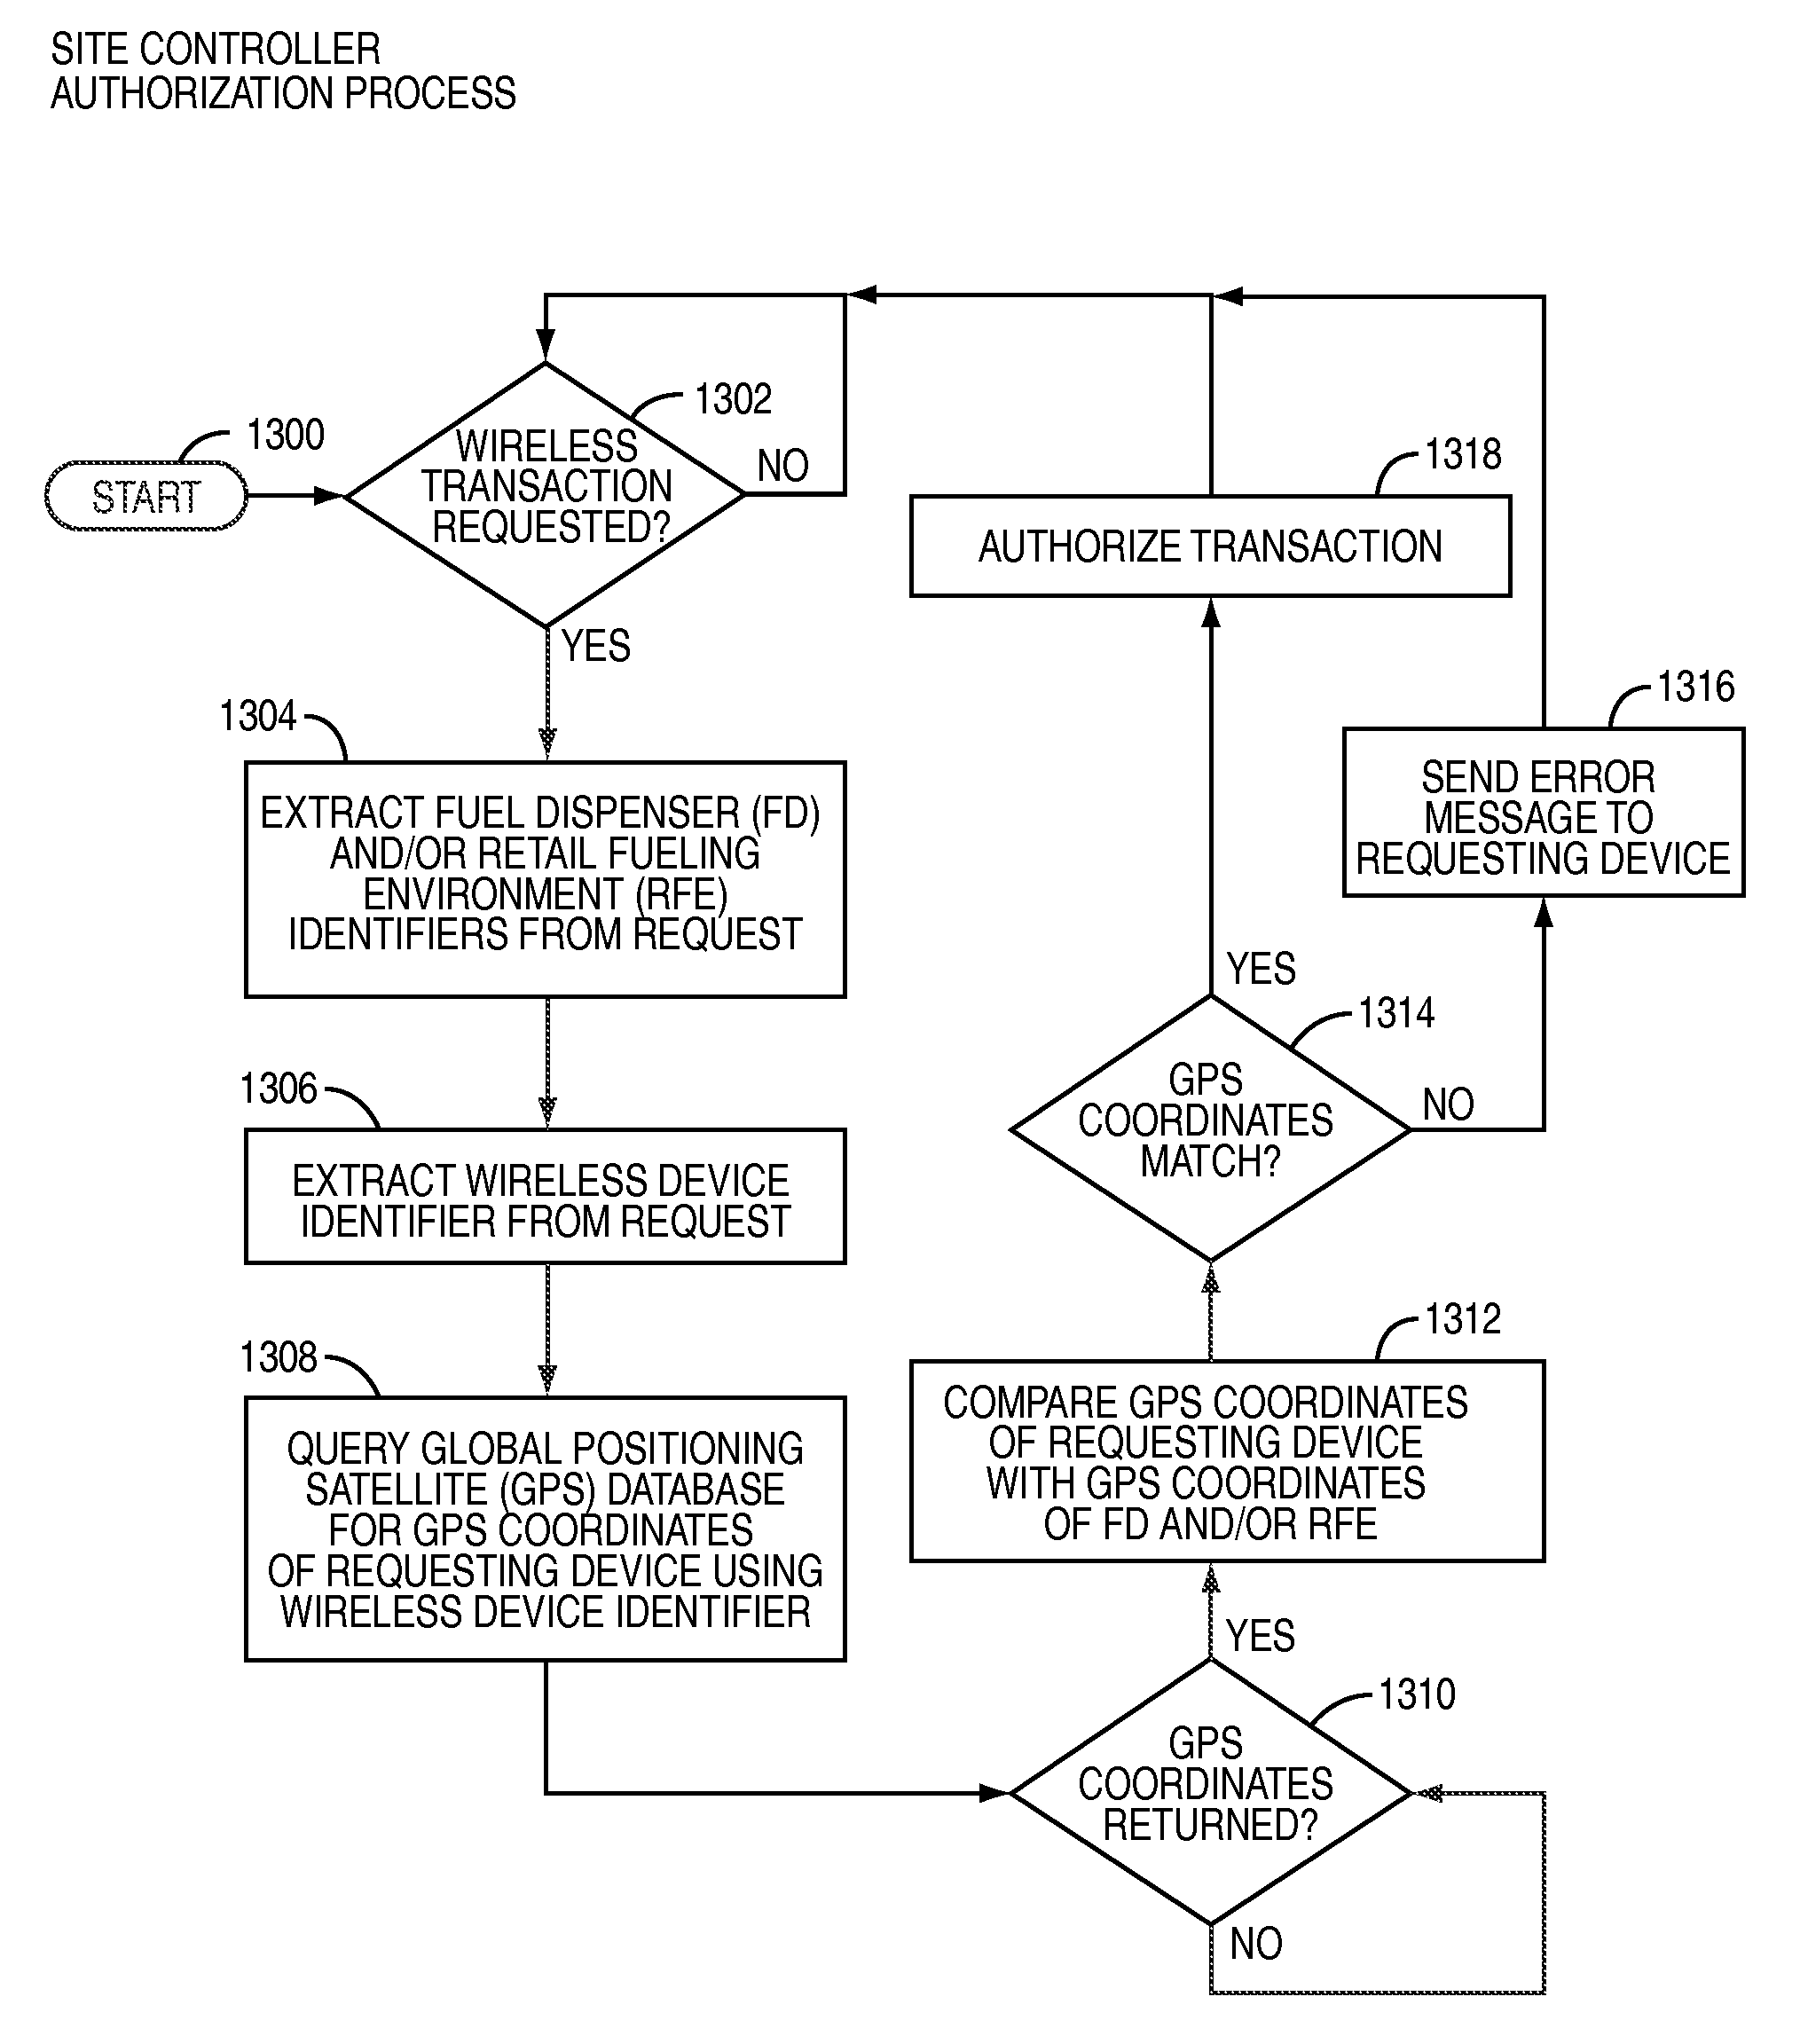 System and method for verification of site location using an application-specific user interface on a personal communication device